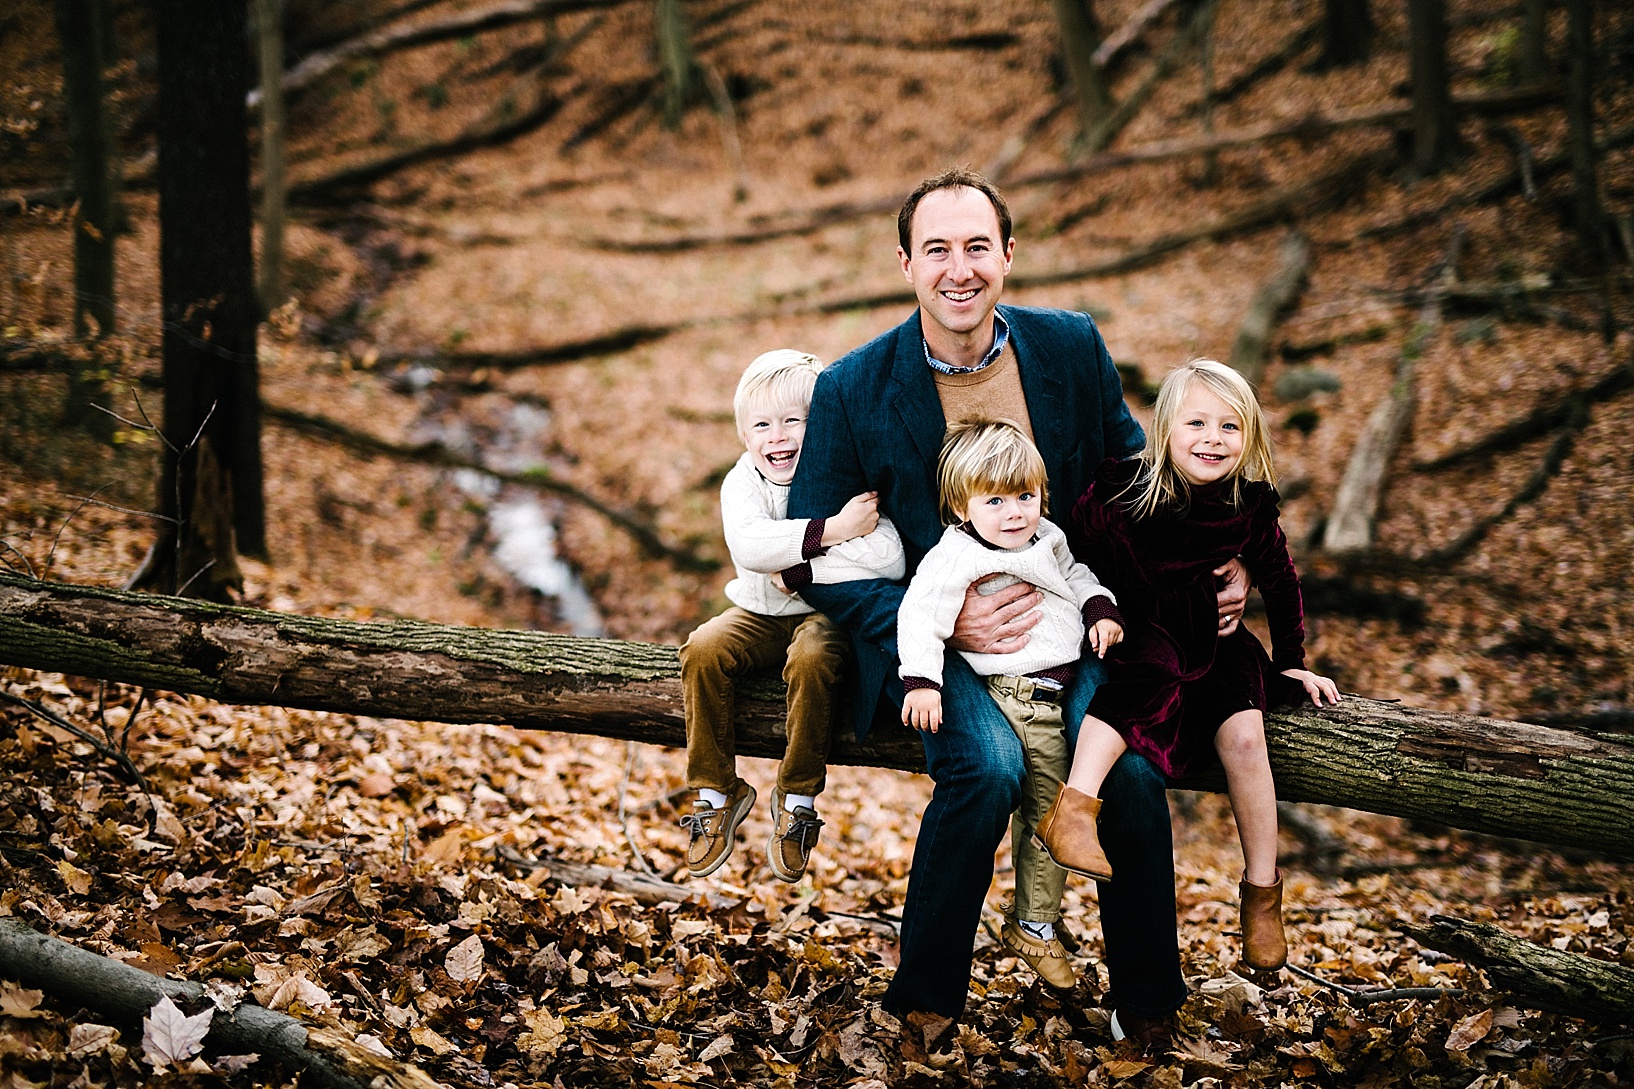 Dad sitting on fallen tree log holding three young kids